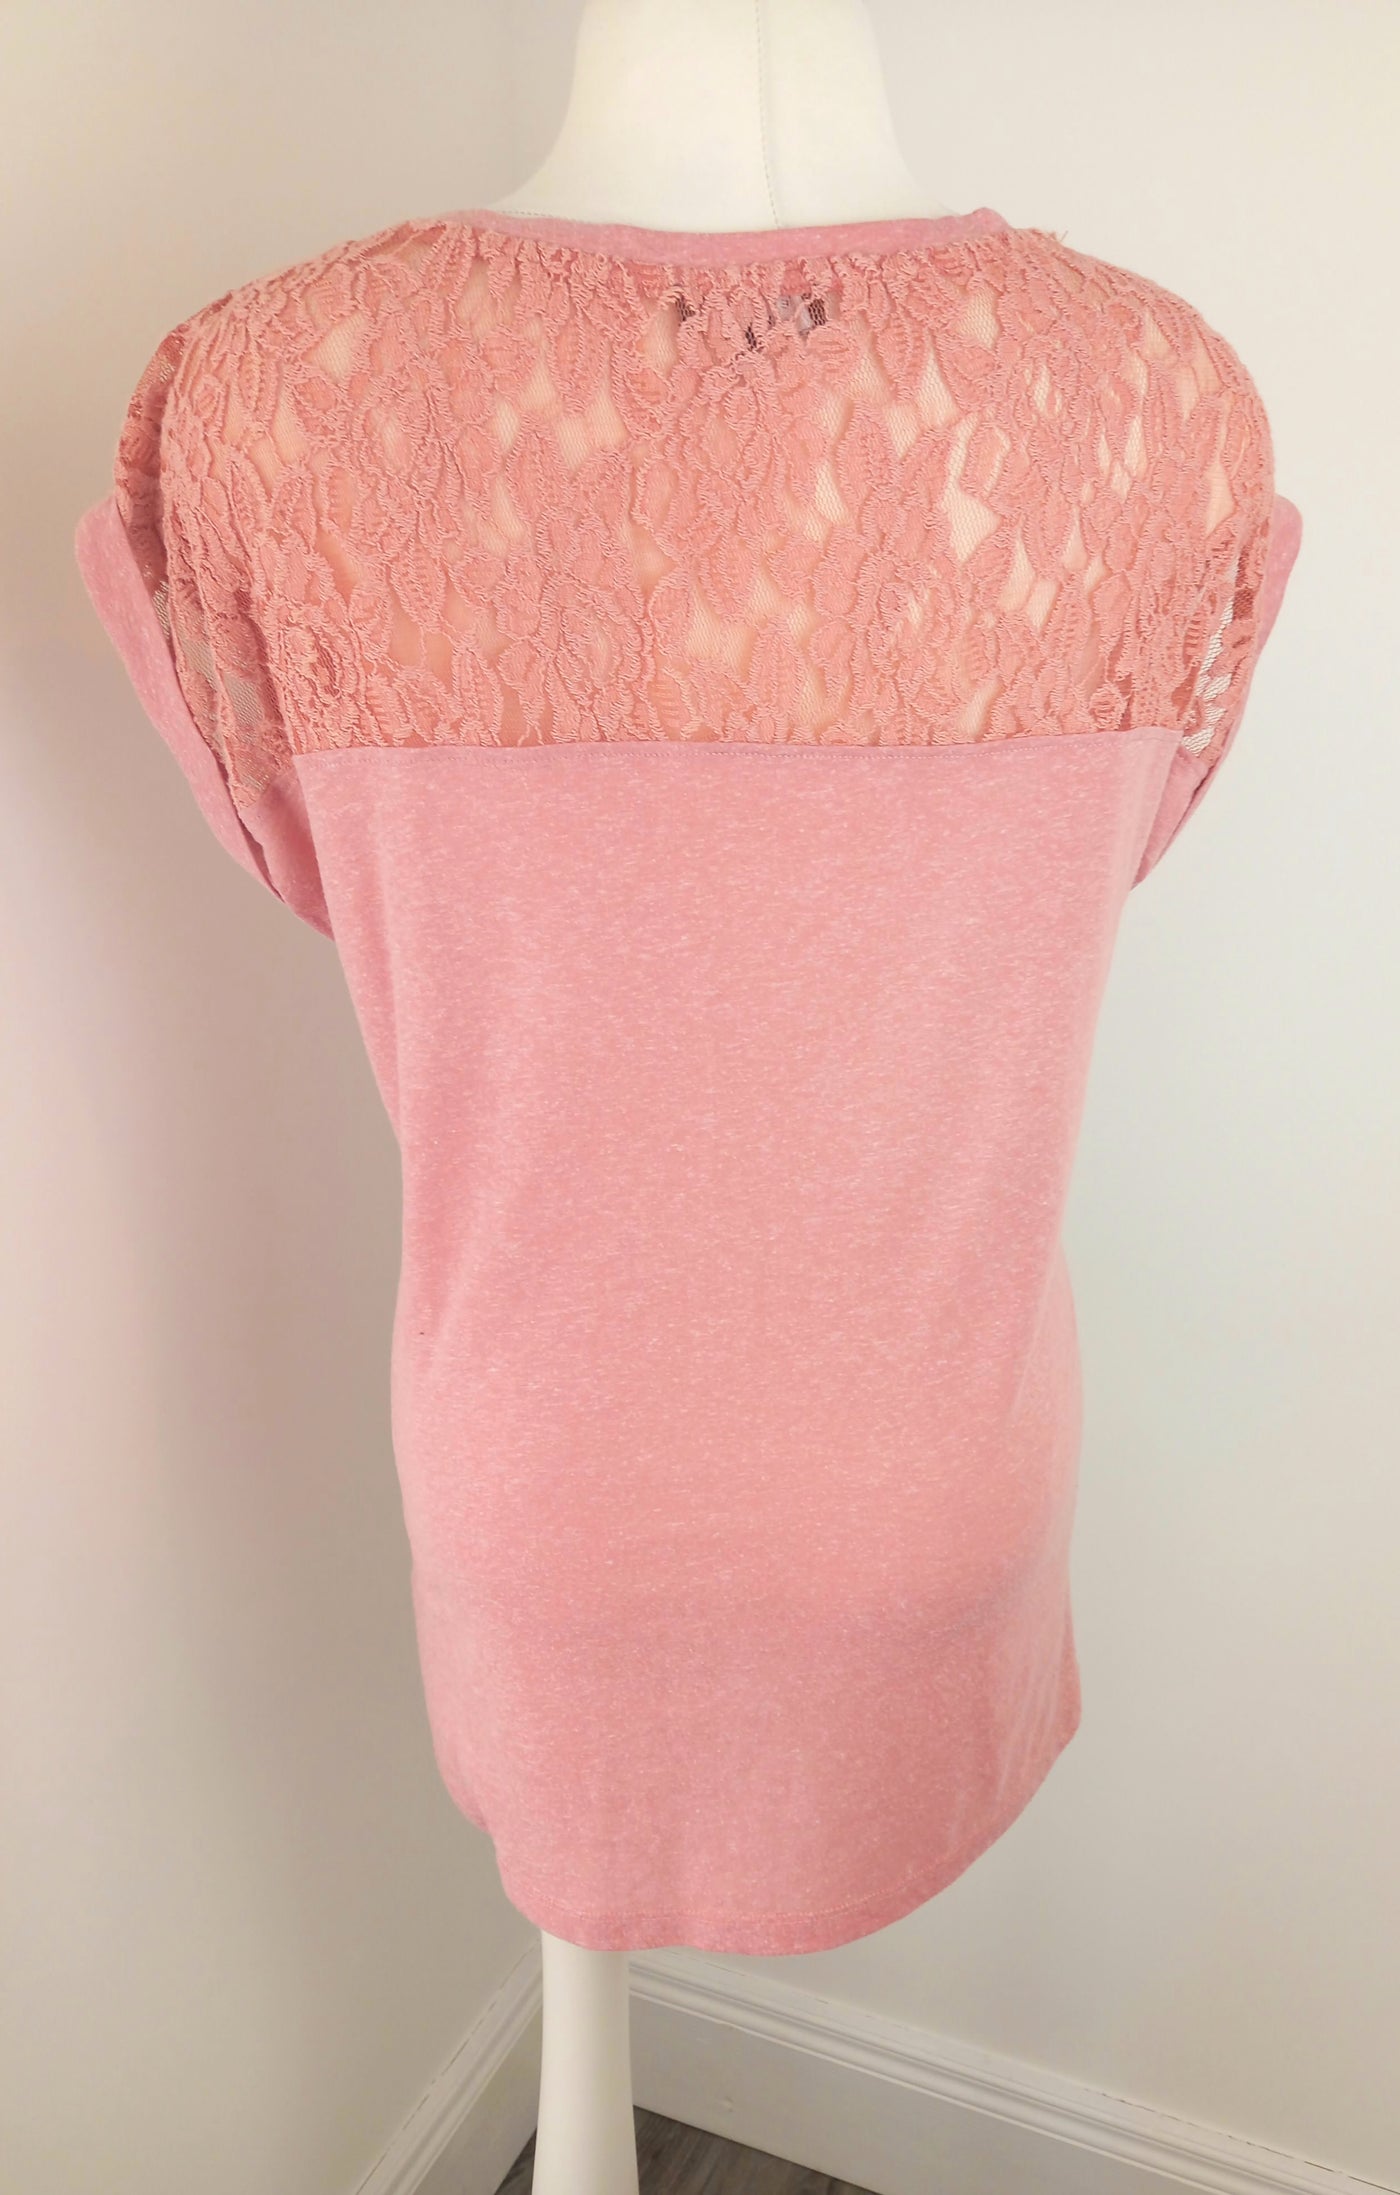 New Look Maternity blush pink cap sleeve top with lace back detail - Size 16